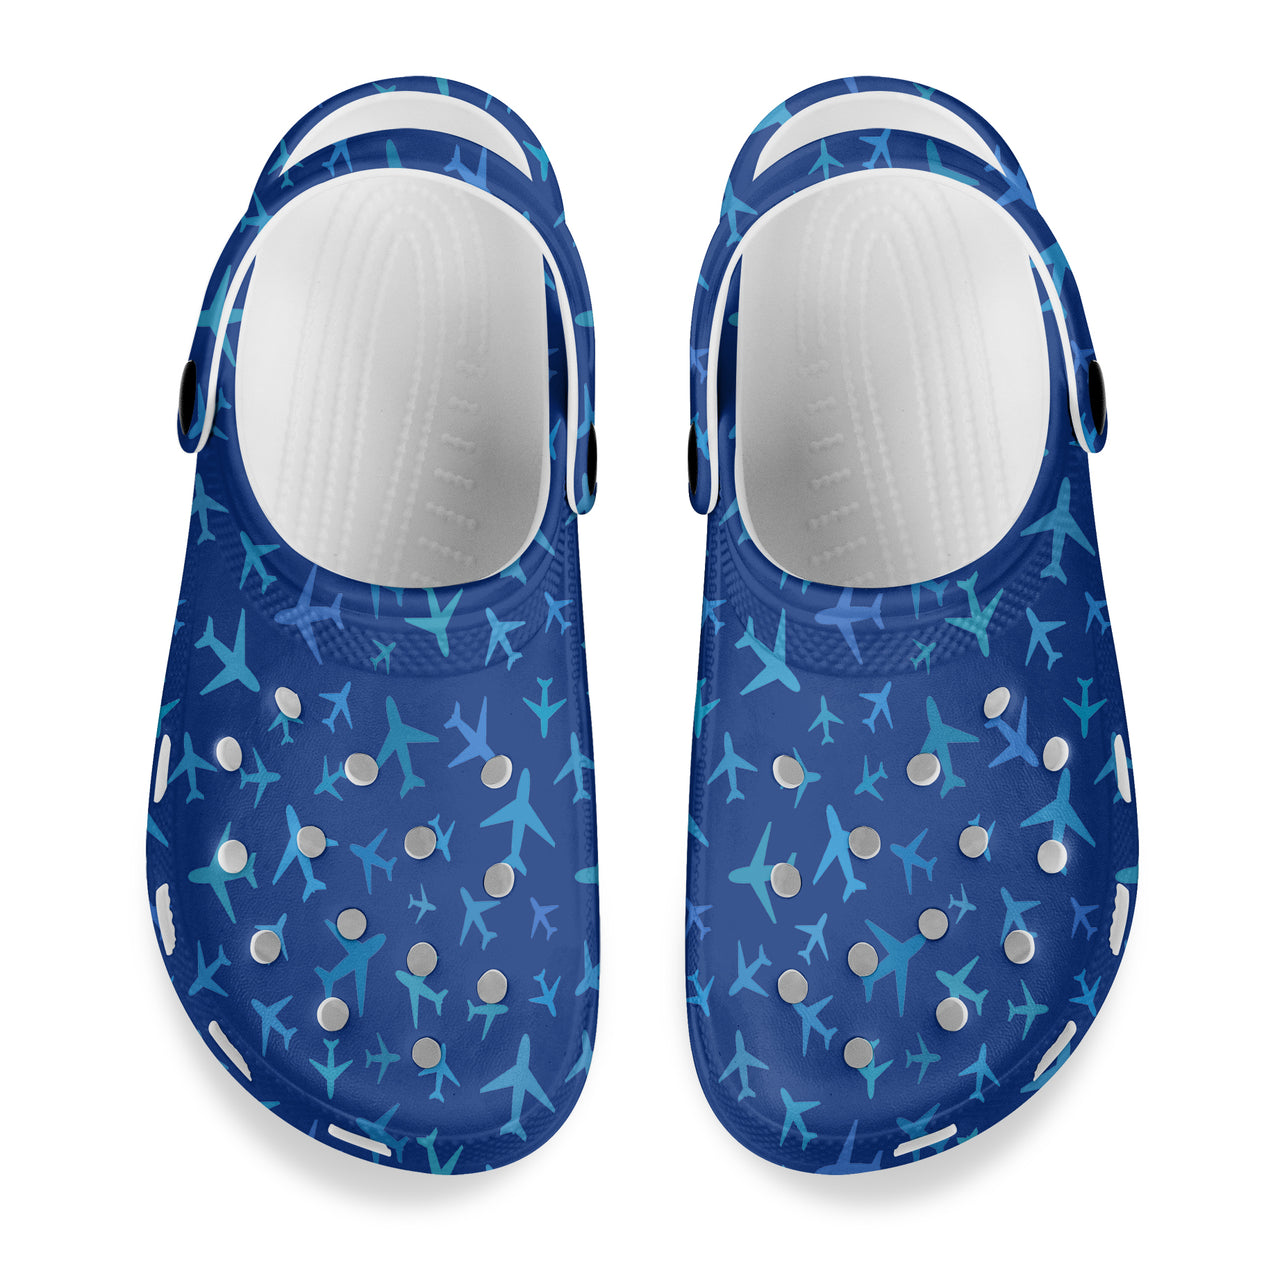 Many Airplanes Blue Designed Hole Shoes & Slippers (MEN)